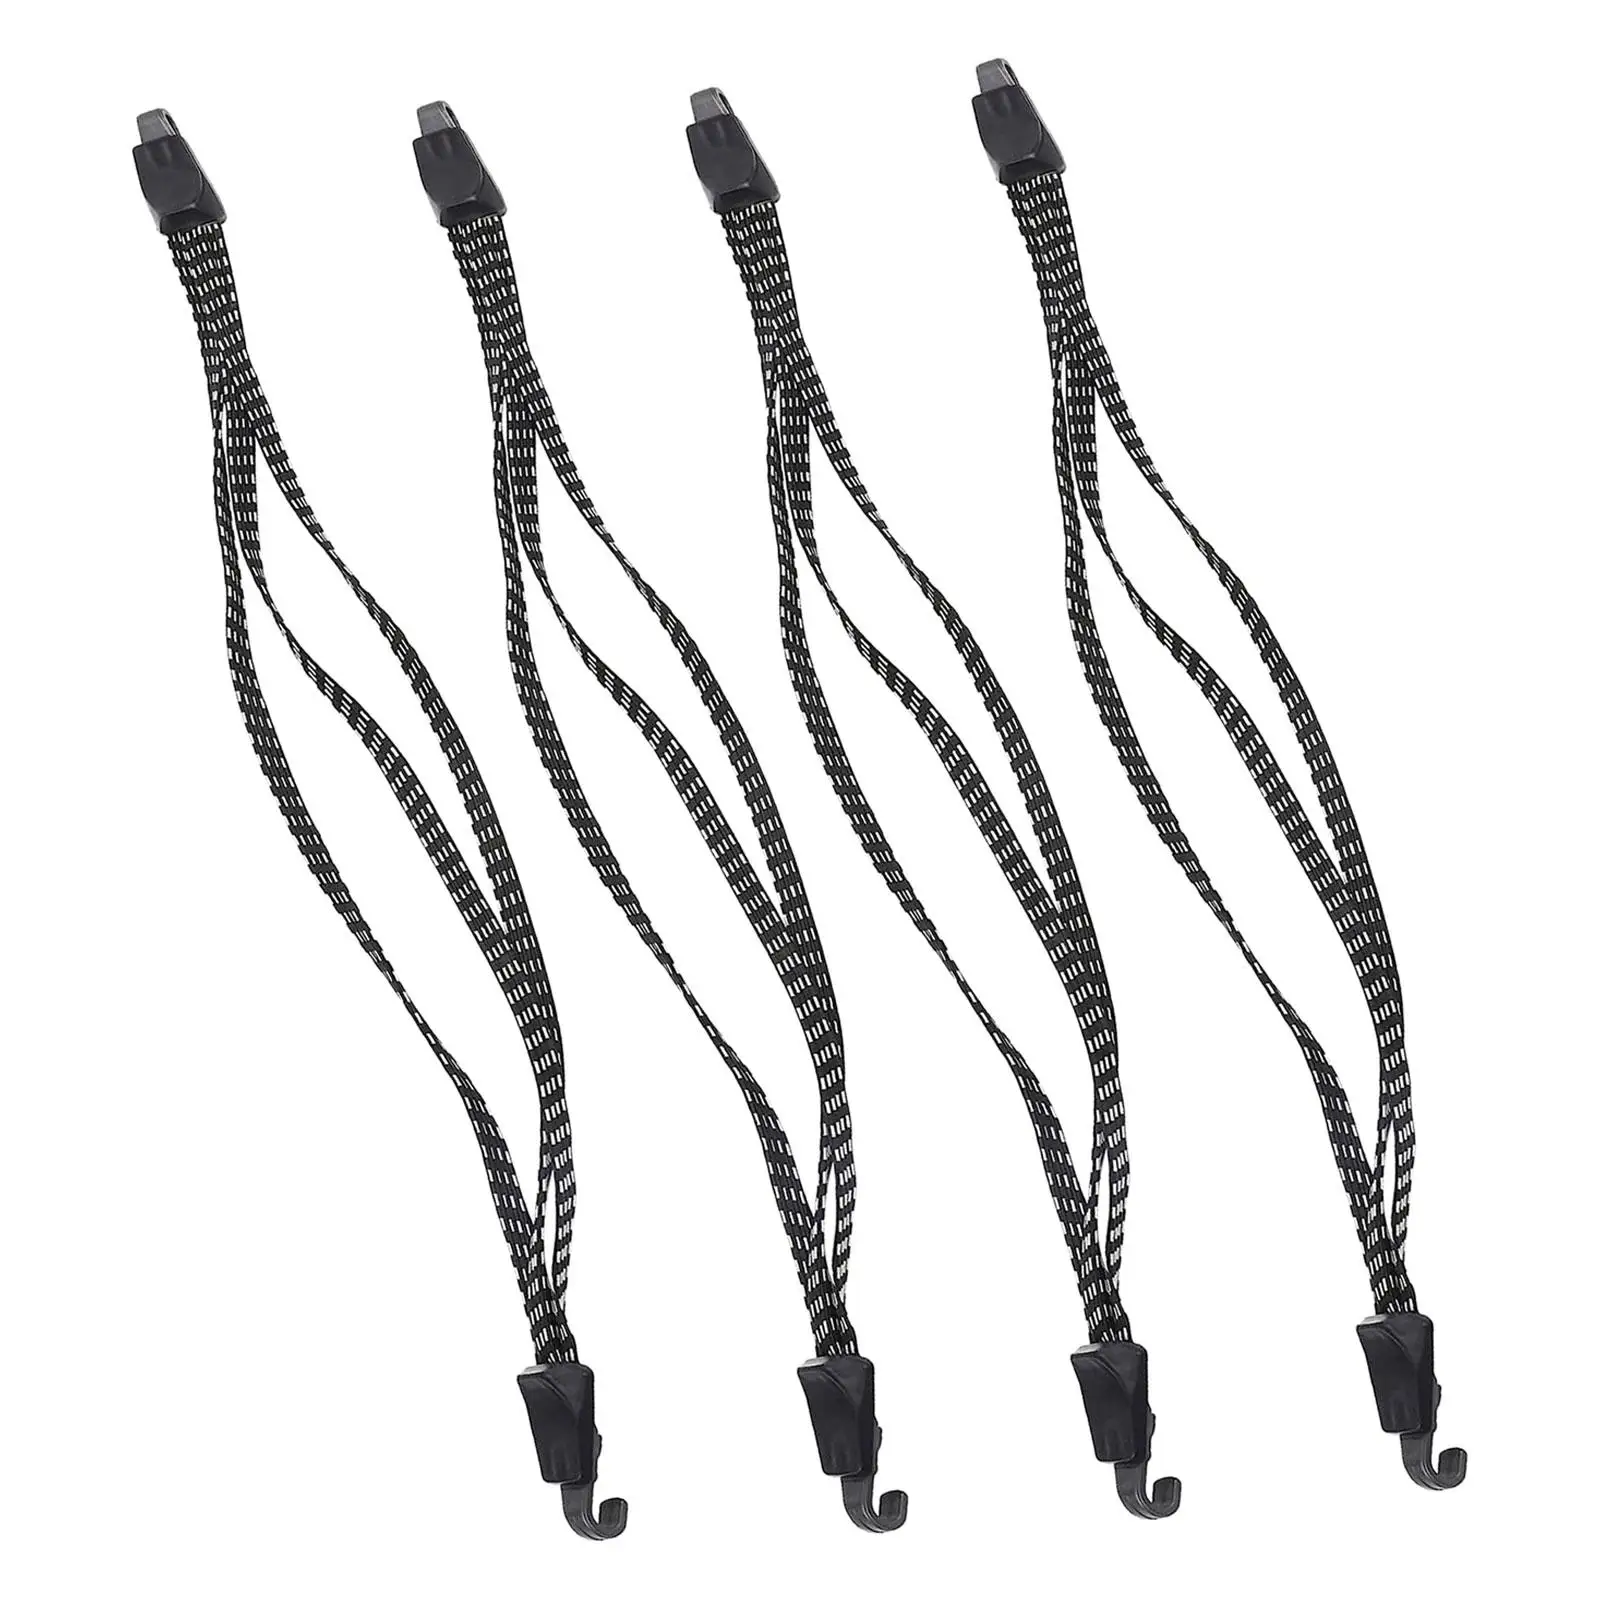 4x Bungee Cords with Hooks Motorcycle Luggage Rack Straps for Cart Tie Down